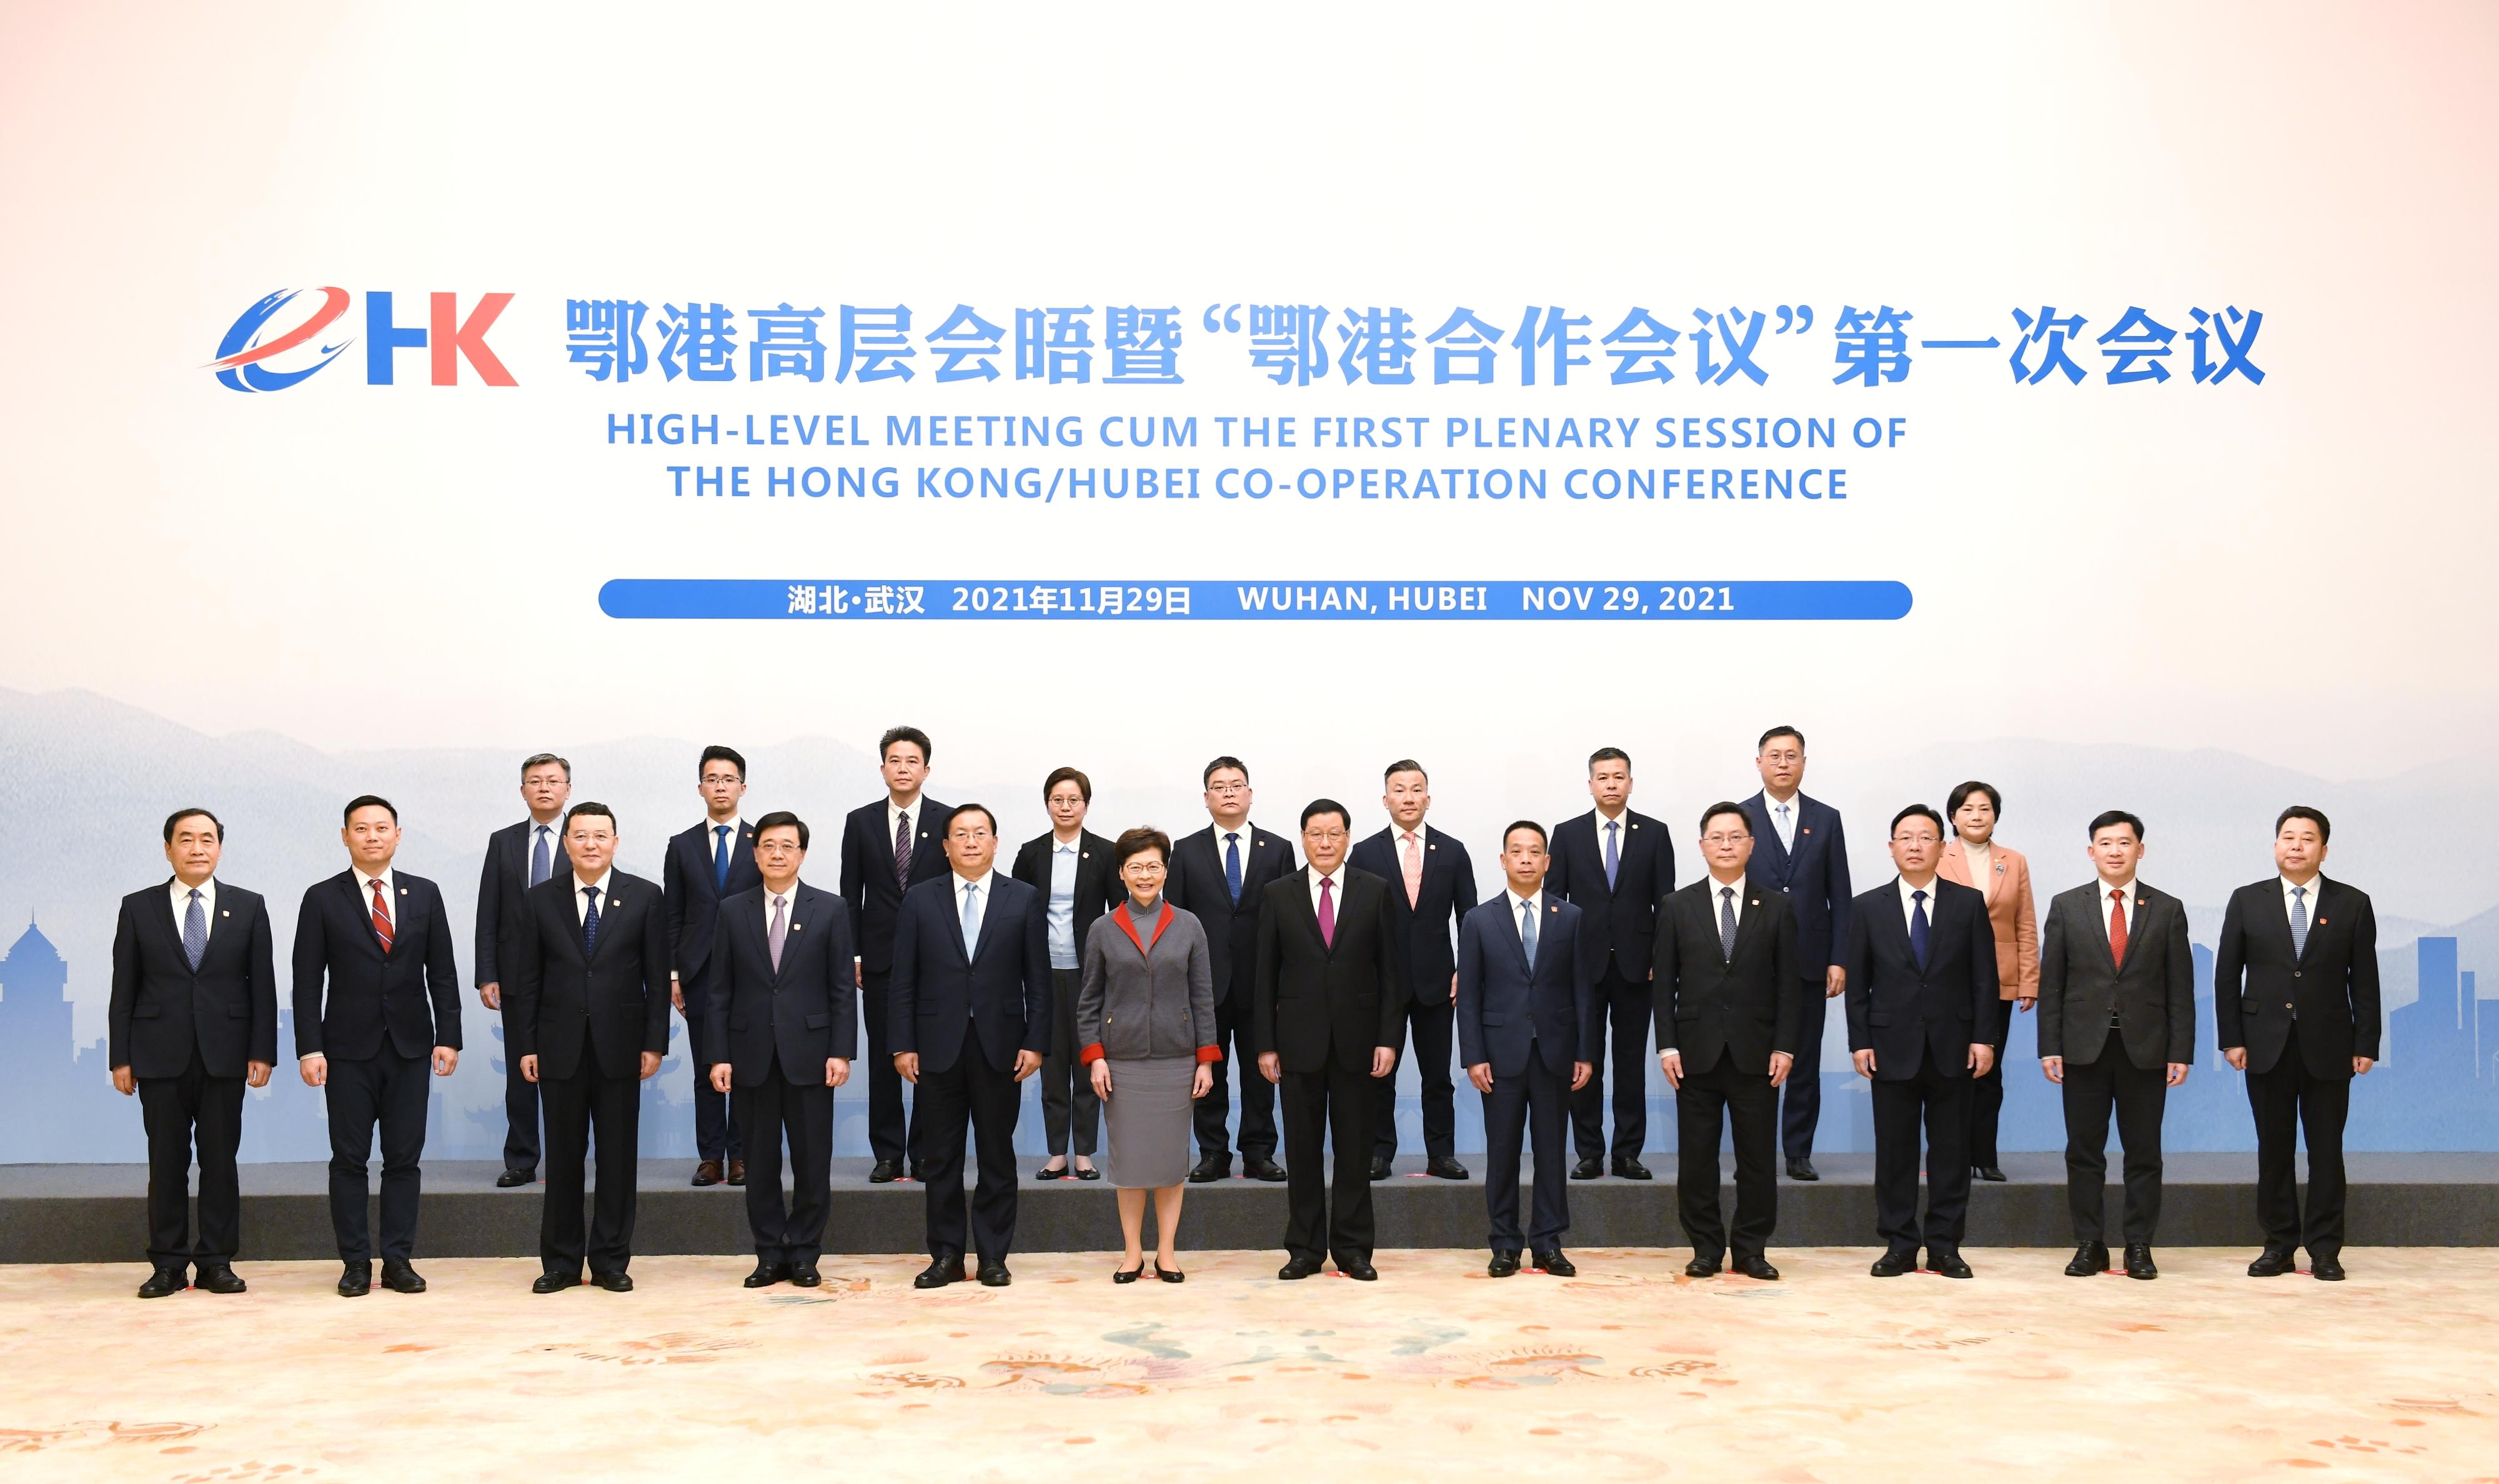 The Chief Executive, Mrs Carrie Lam, today (November 29) led a delegation of the Hong Kong Special Administrative Region Government to attend the High-Level Meeting cum the First Plenary Session of the Hong Kong/Hubei Co-operation Conference. Mrs Lam (front row, sixth left) is pictured with the Secretary of the CPC Hubei Provincial Committee, Mr Ying Yong (front row, sixth right), and other participants of the conference.